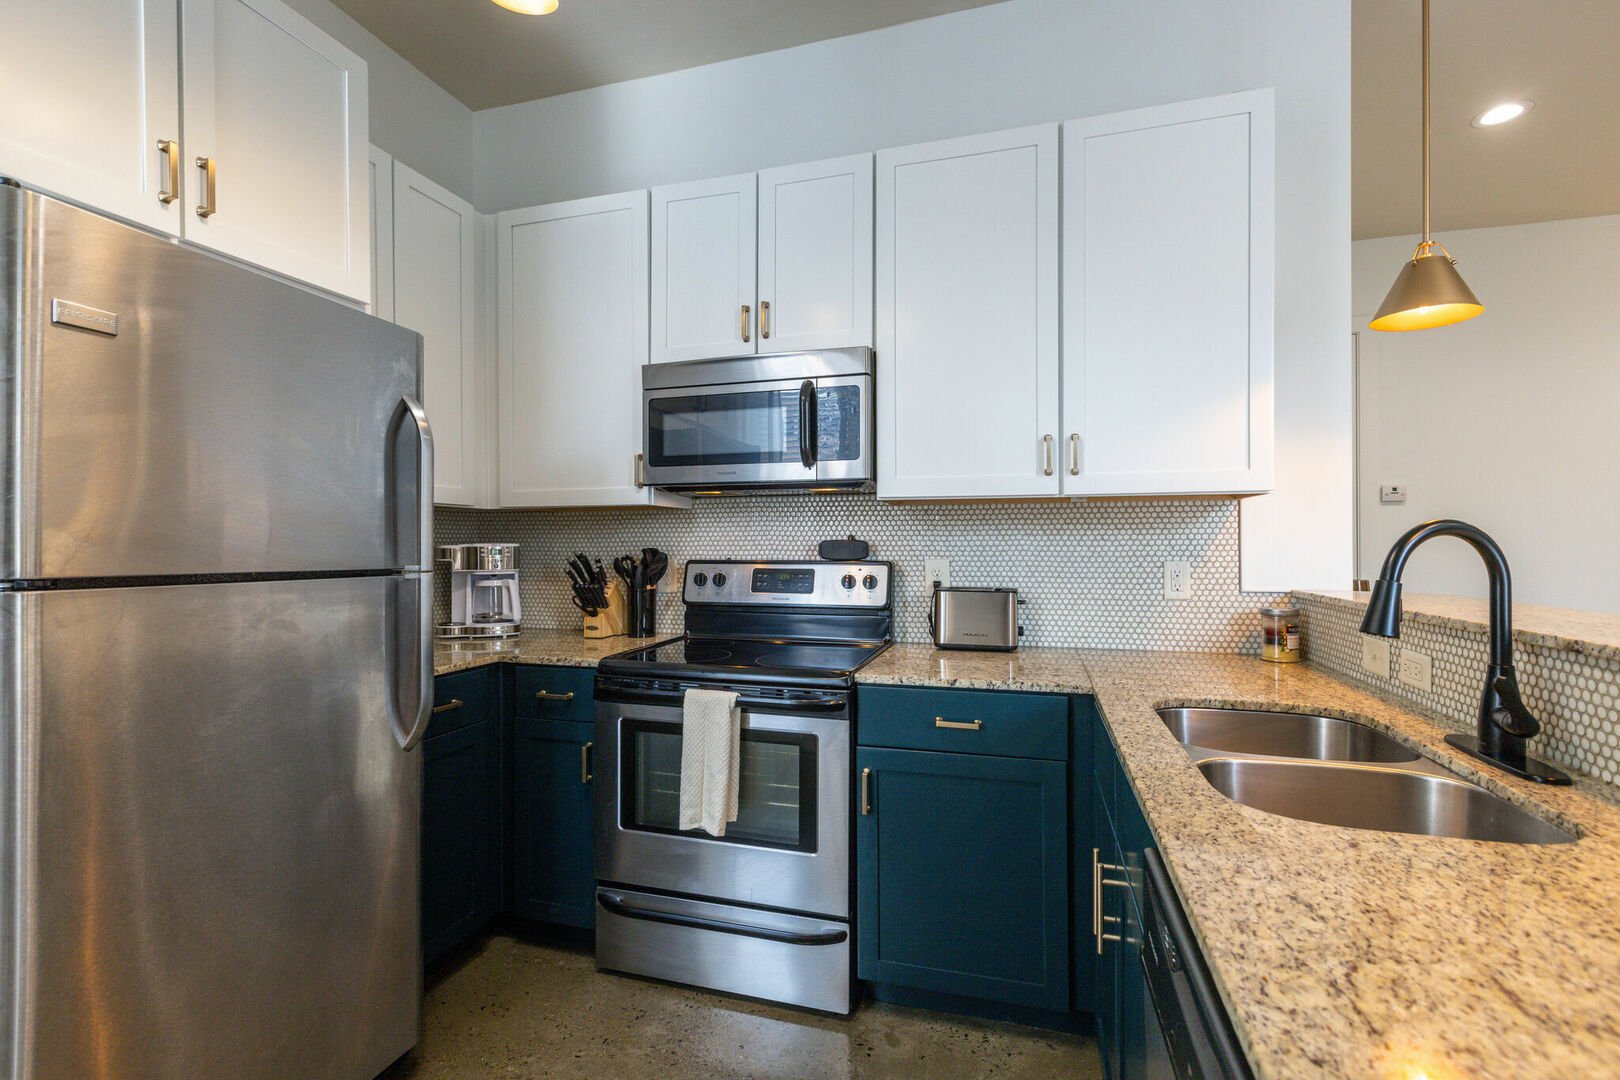 Fully equipped kitchen with stainless steel appliances, granite counter tops, breakfast bar seating, and stocked with your basic cooking essentials.